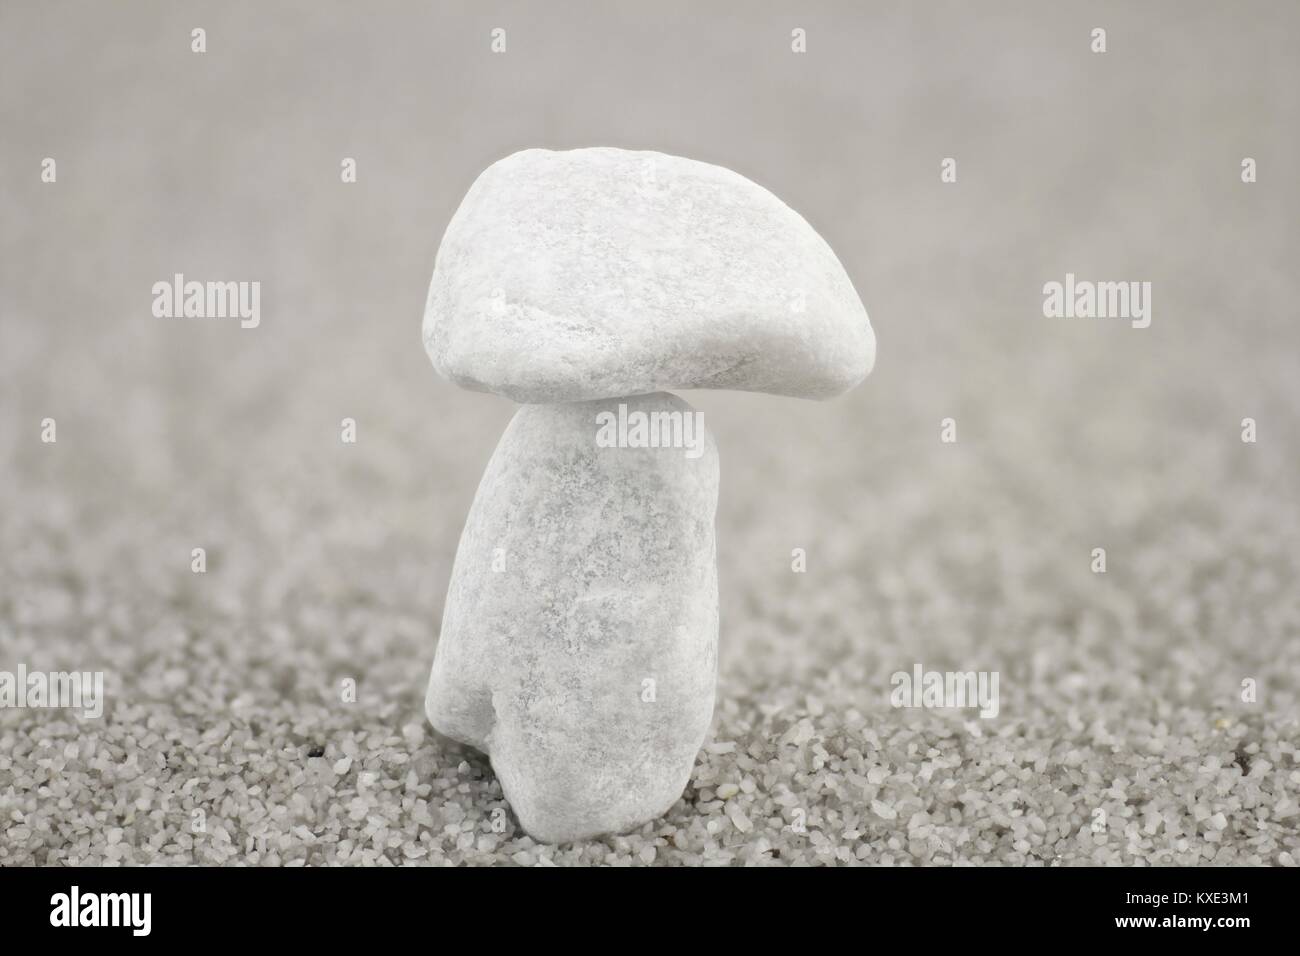 White pebbles on top of each other in the form of a mushroom Stock Photo